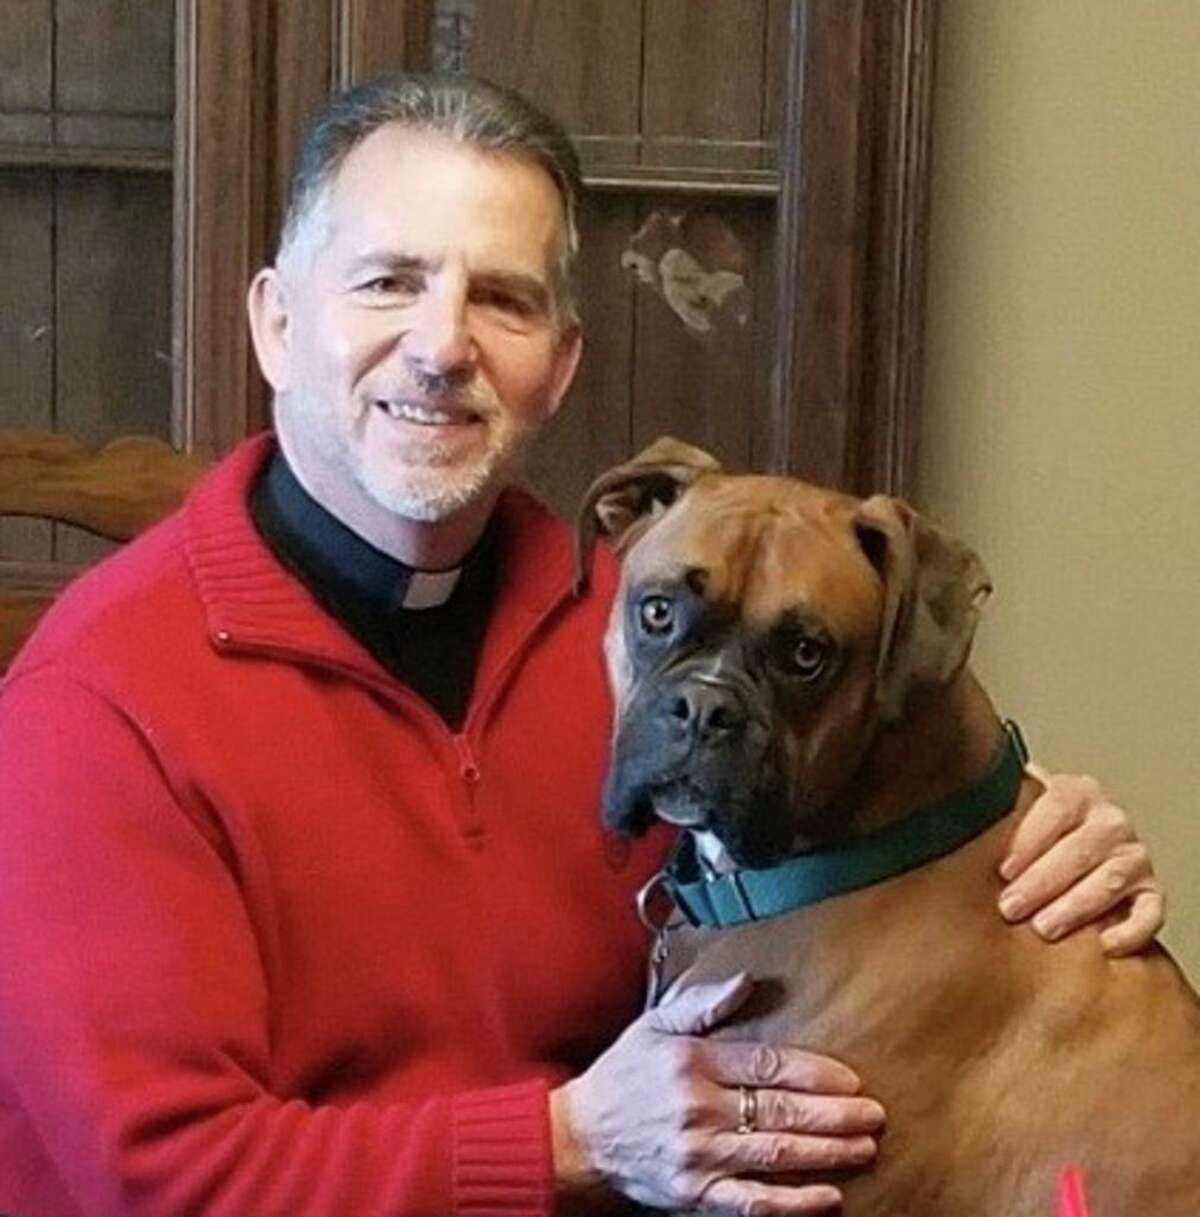 The Rev. John Antonelle, pastor of St. Mary Church in Portland, with his — and the parish’s — dog, Patsy.